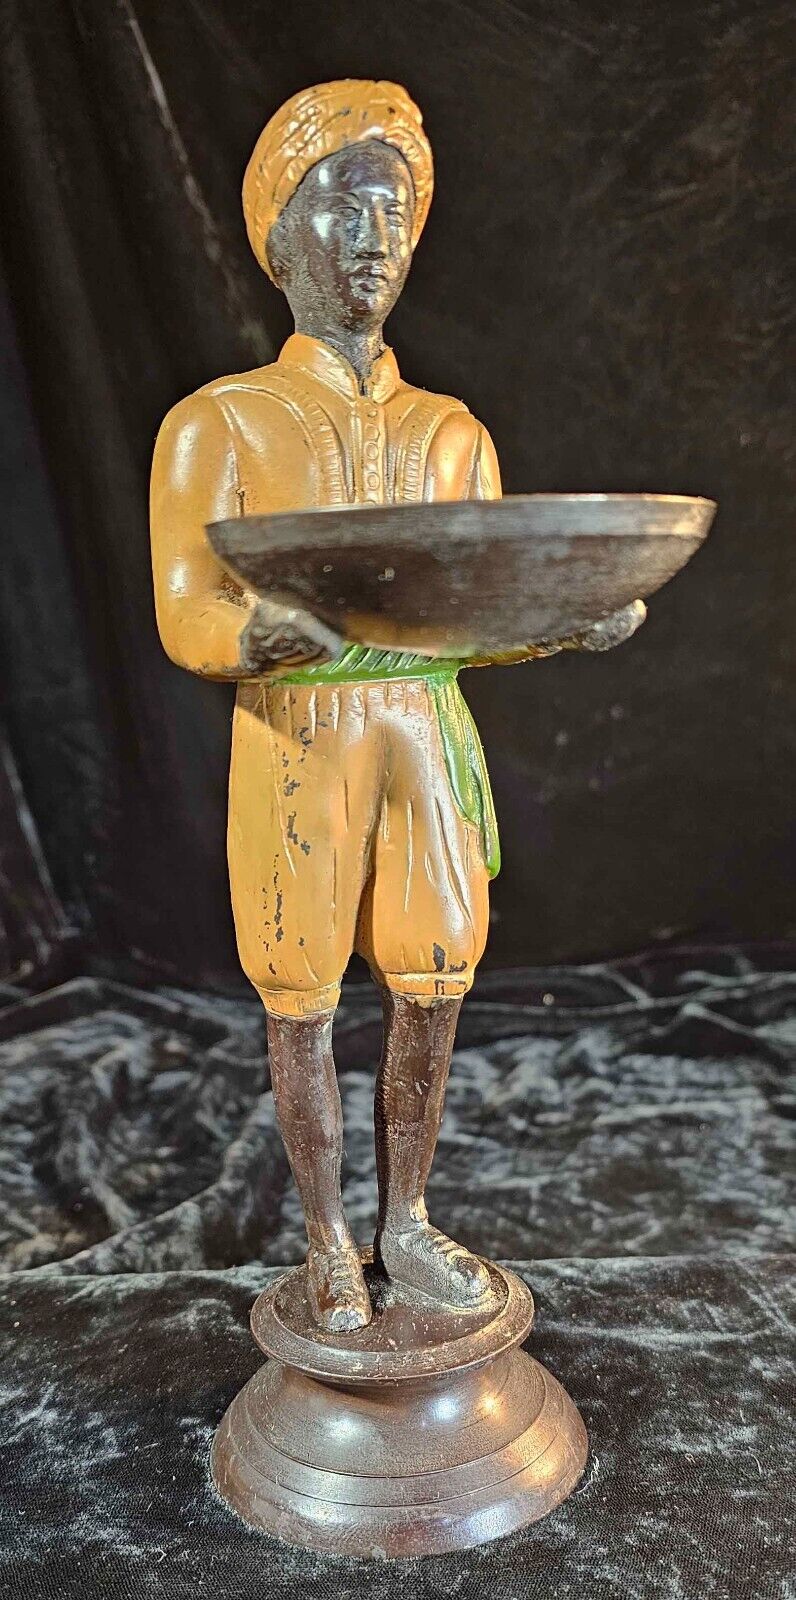 Cold Painted Bronze Blackamoor Statue Figure East India Man Holding Tray